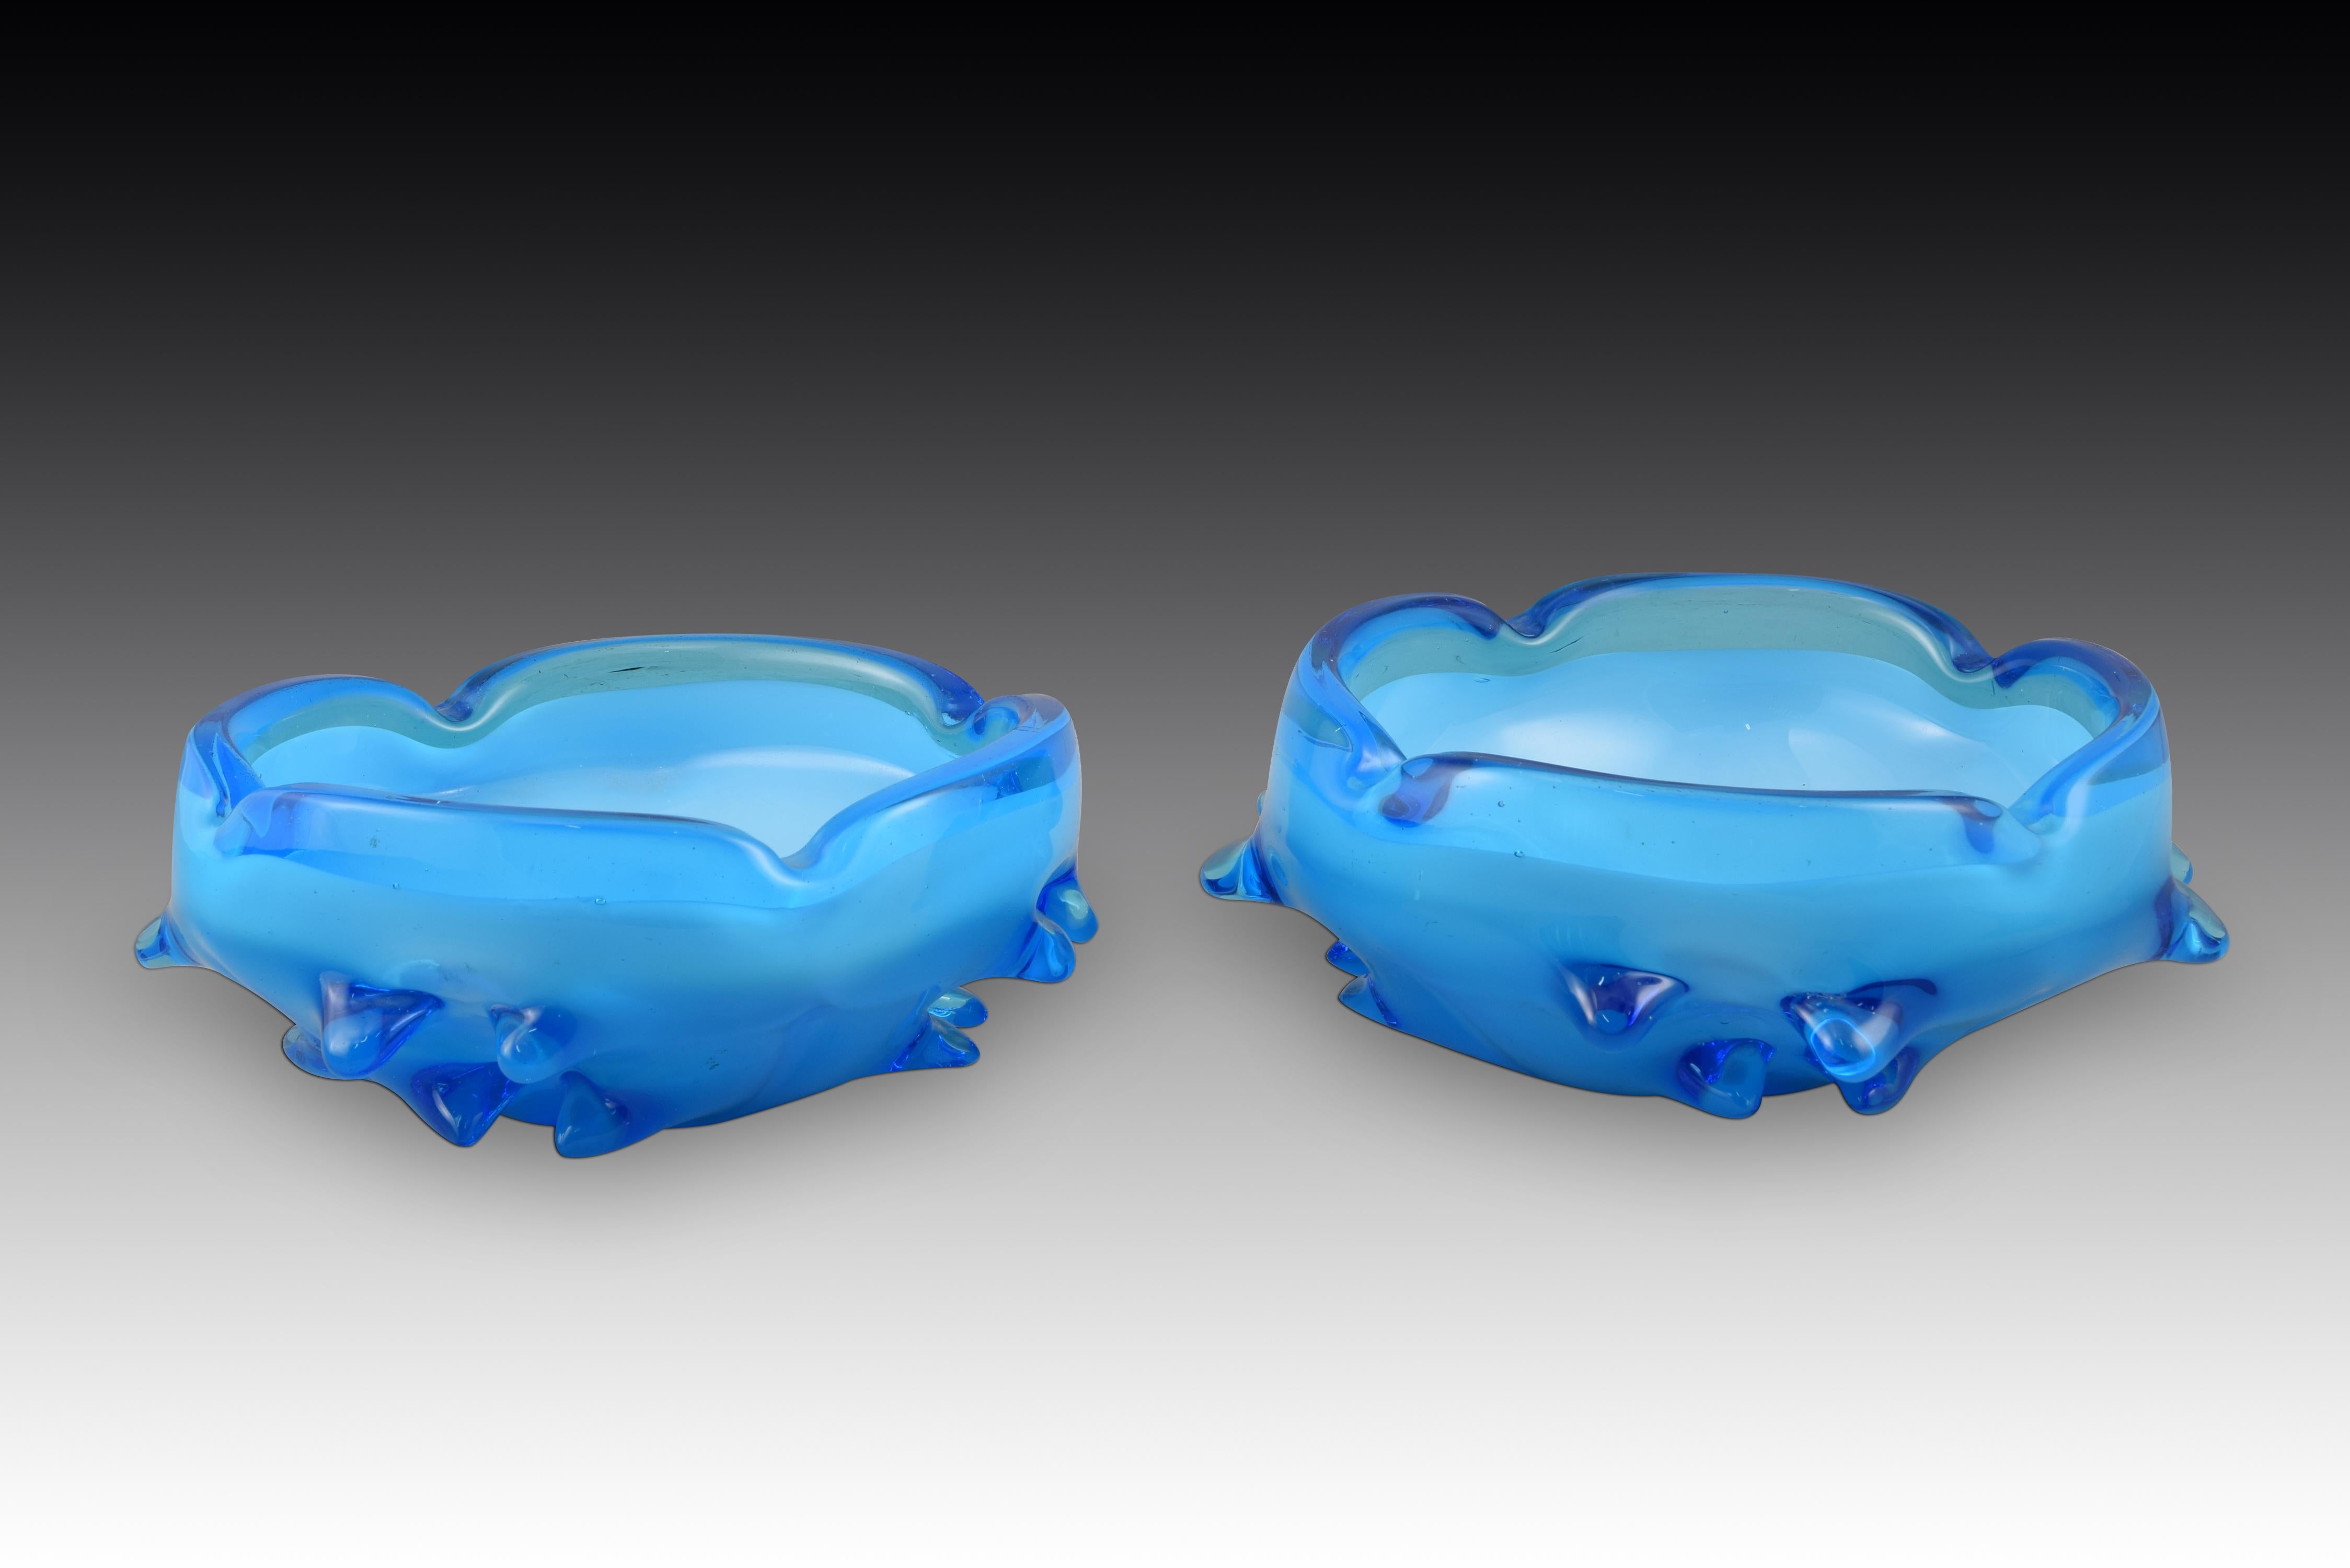 Pair of ashtrays. Blue glass. Murano, Italy, 20th century. 
Pair of glass ashtrays combining two shades of blue and decorated, on the outside, with a series of thick projections or spikes towards the bottom of them. Due to the shape and quality of